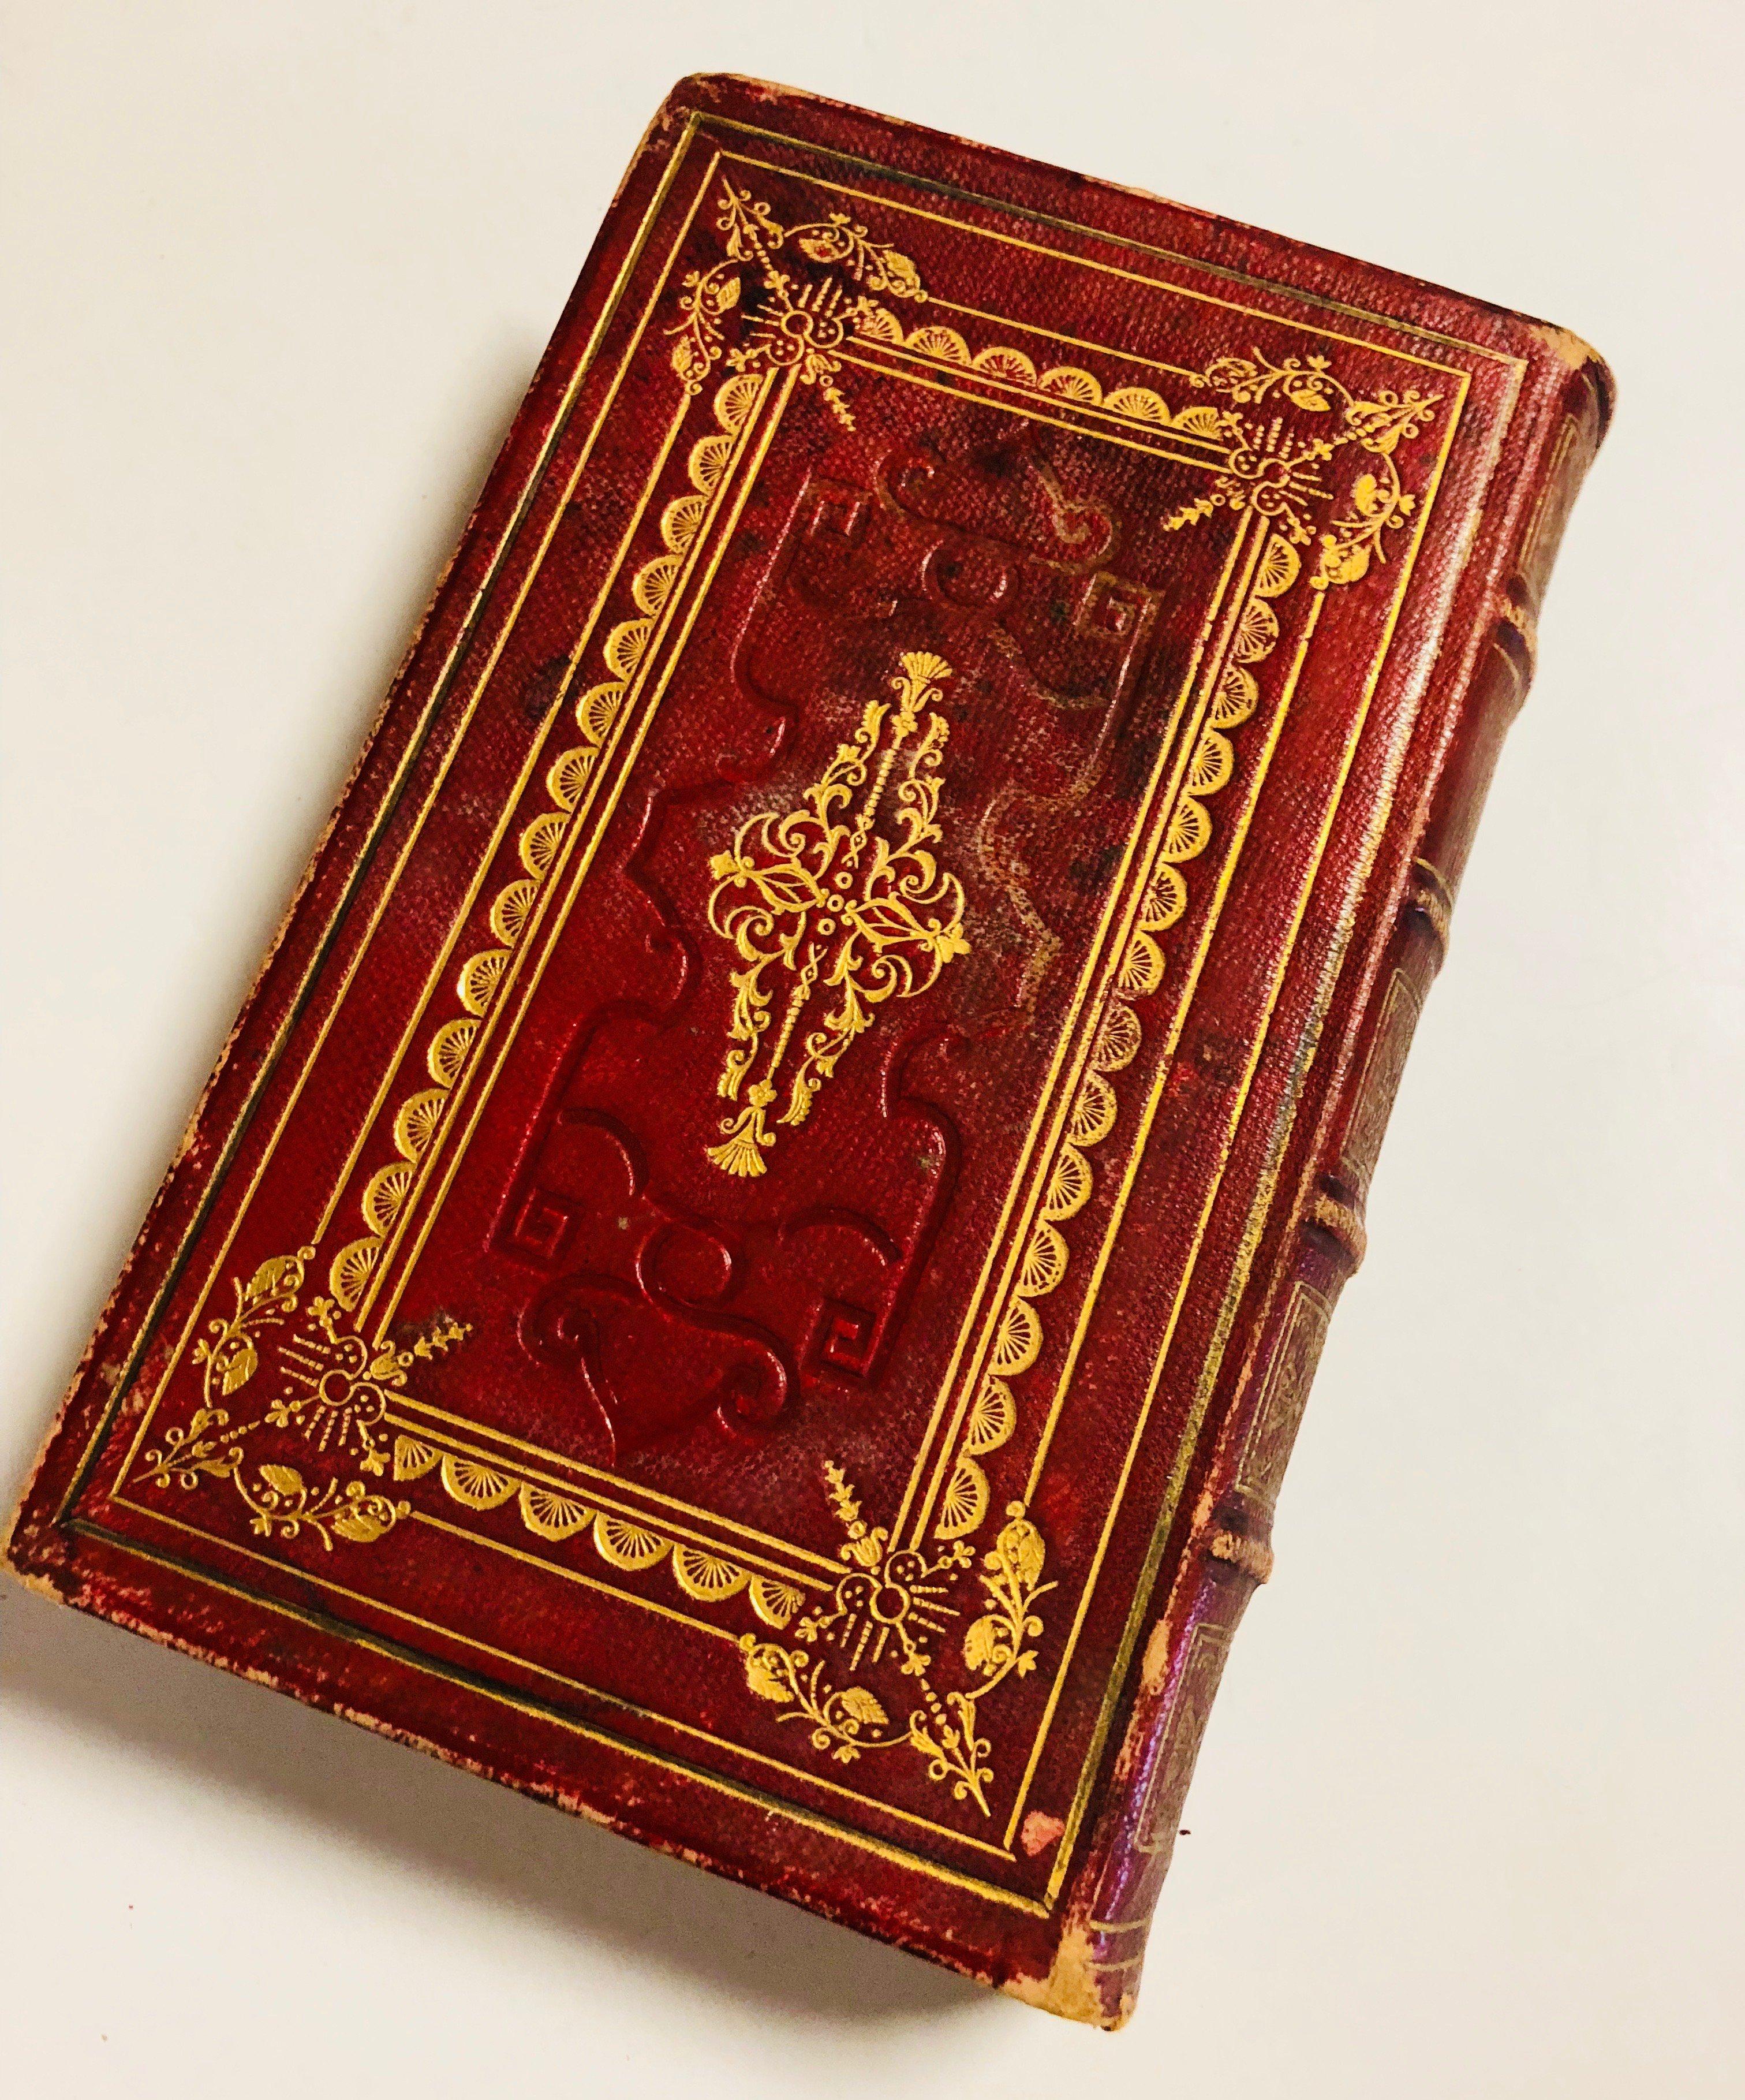 The Works of Alexander Pope (c.1855) Poetical Works for Sir Walter Scott (1871) Decorative Bindings